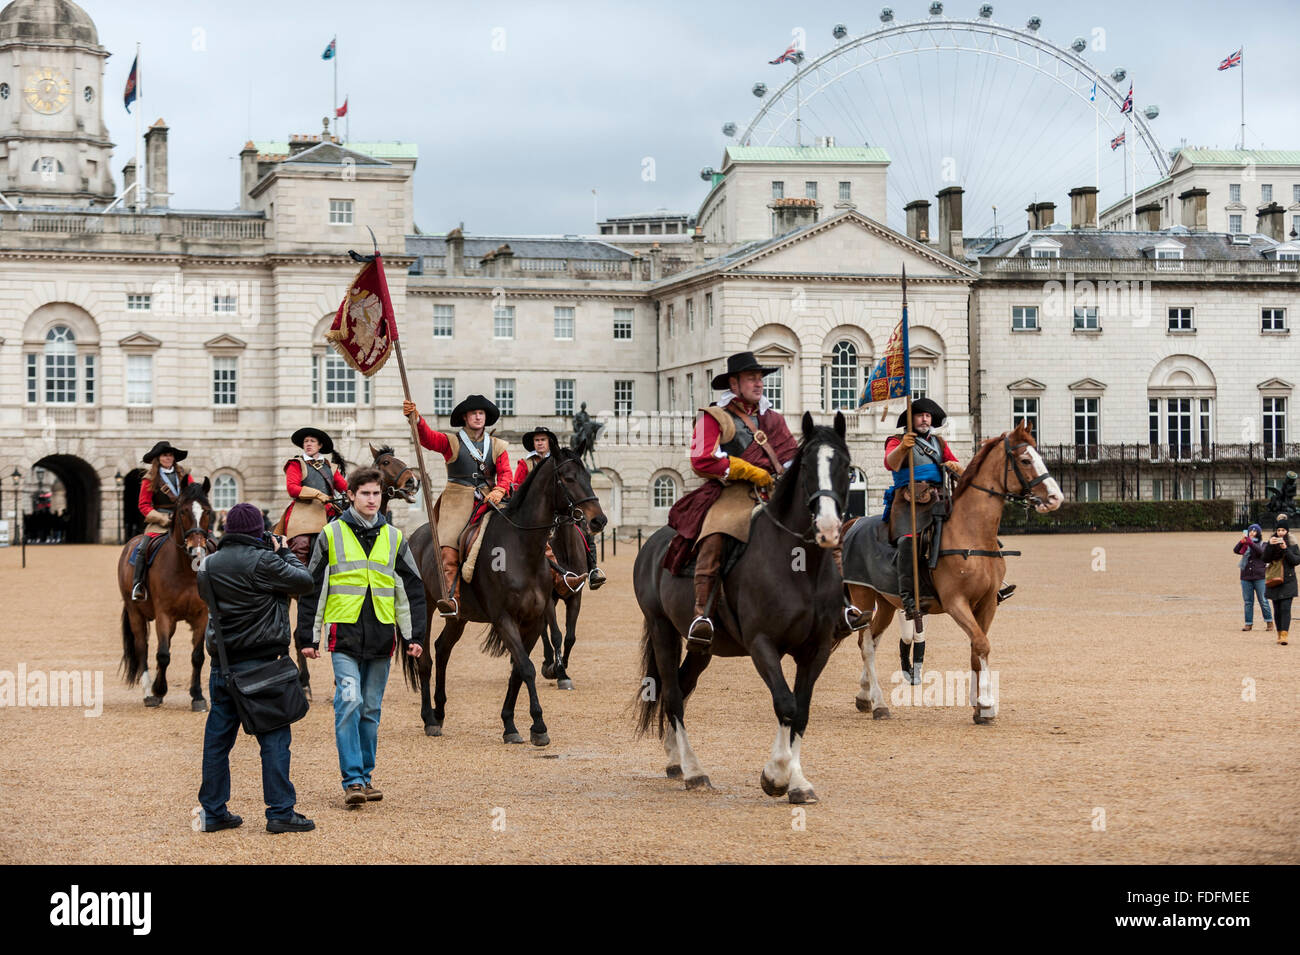 London, UK. 31st January, 2016. Members of The English Civil War Society, gather in Horse Guards Parade to bring to life The King's Army (the Royalist half of the English Civil War Society) as they retrace the route taken by King Charles I from St James Palace to the place of his execution at the Banqueting House in Whitehall. Credit:  Stephen Chung / Alamy Live News Stock Photo